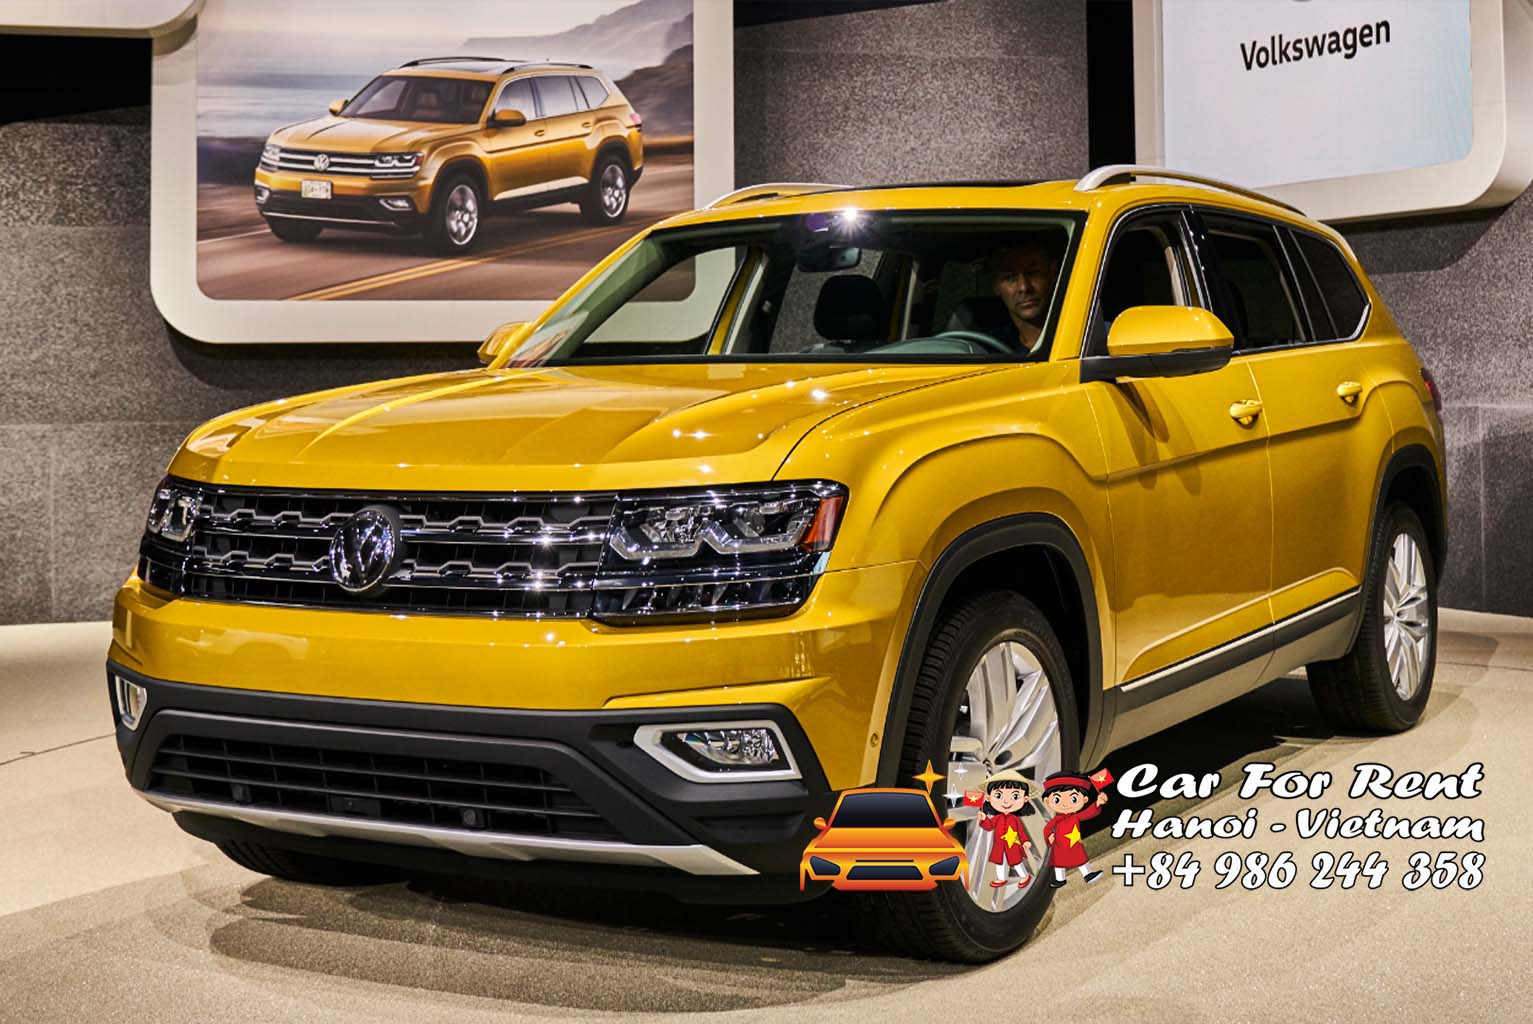 Volkswagen Atlas Car rental with driver hanoi The Ultimate Guide 500